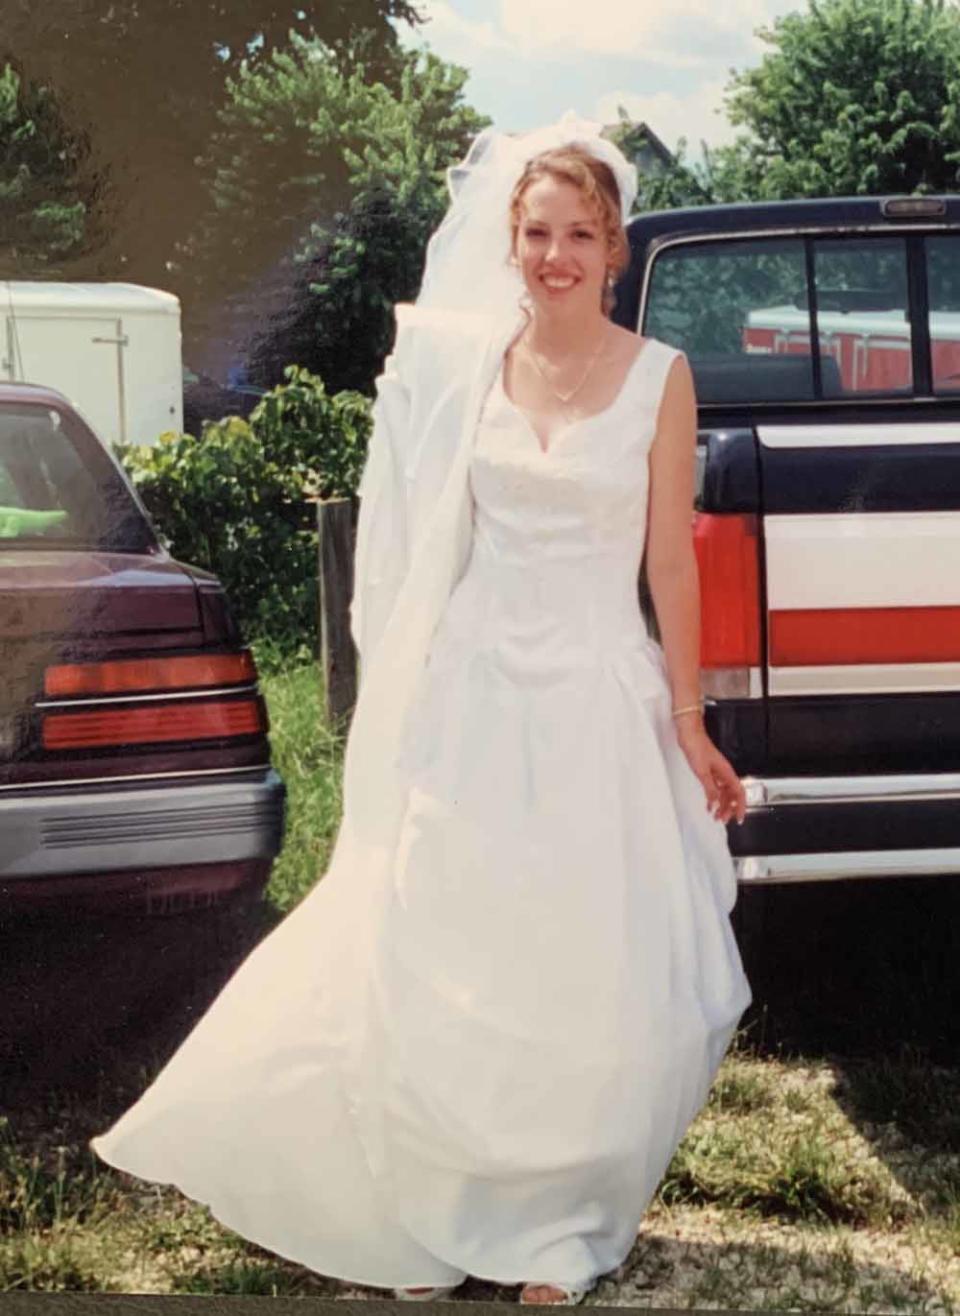 Kendra Blair on her wedding day when she was 19. (PA Real Life/Collect)